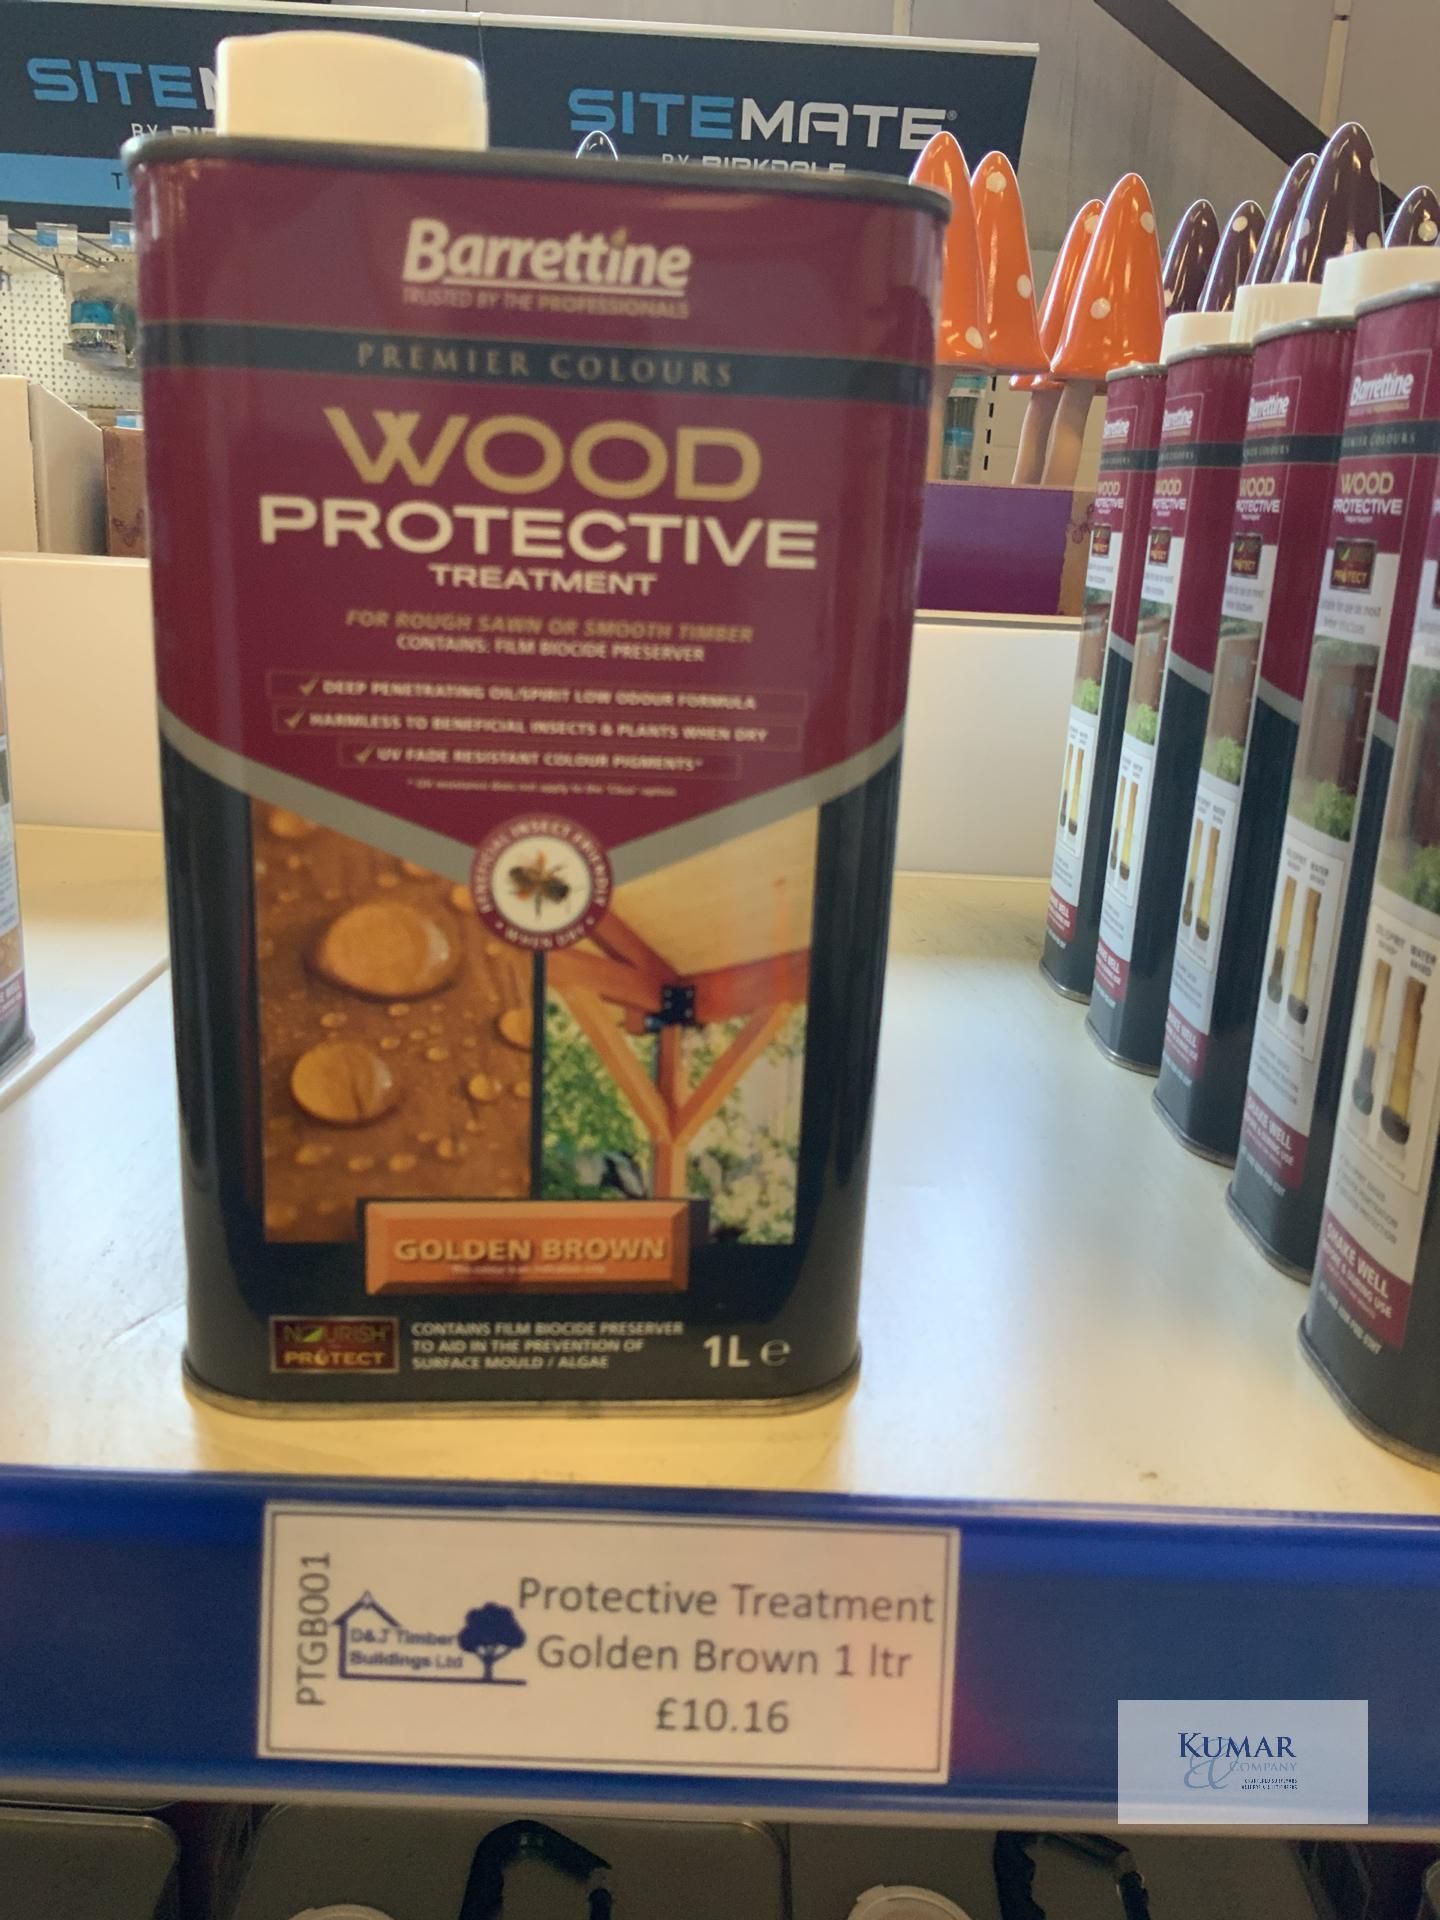 4: 1L Barrettine Golden Brown Wood Protective Treatment (RRP £10.16 each)